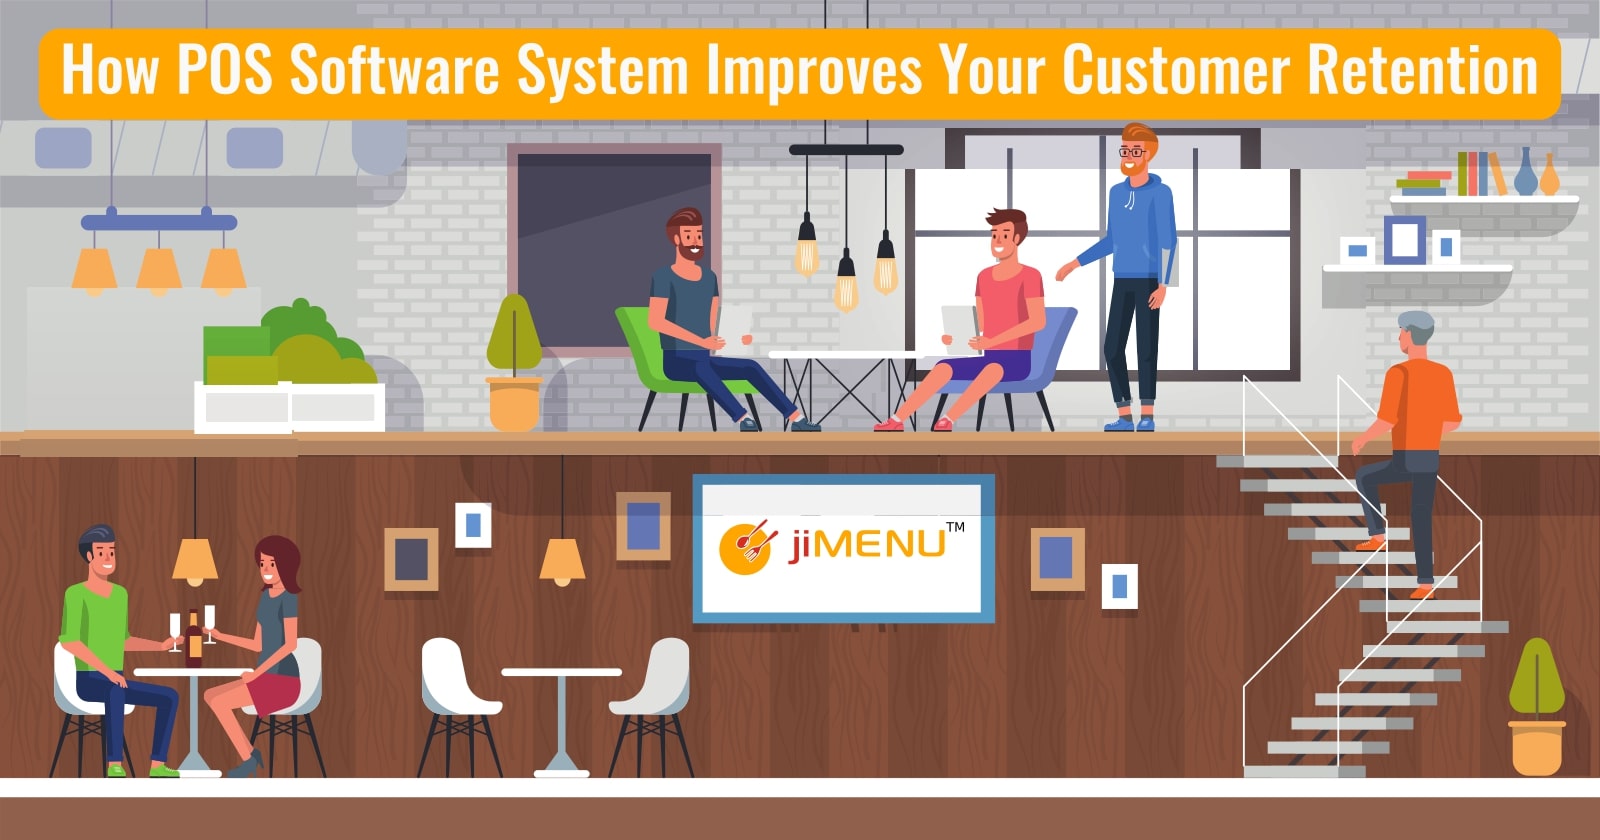 How POS Software System Improves Your Customer Retention